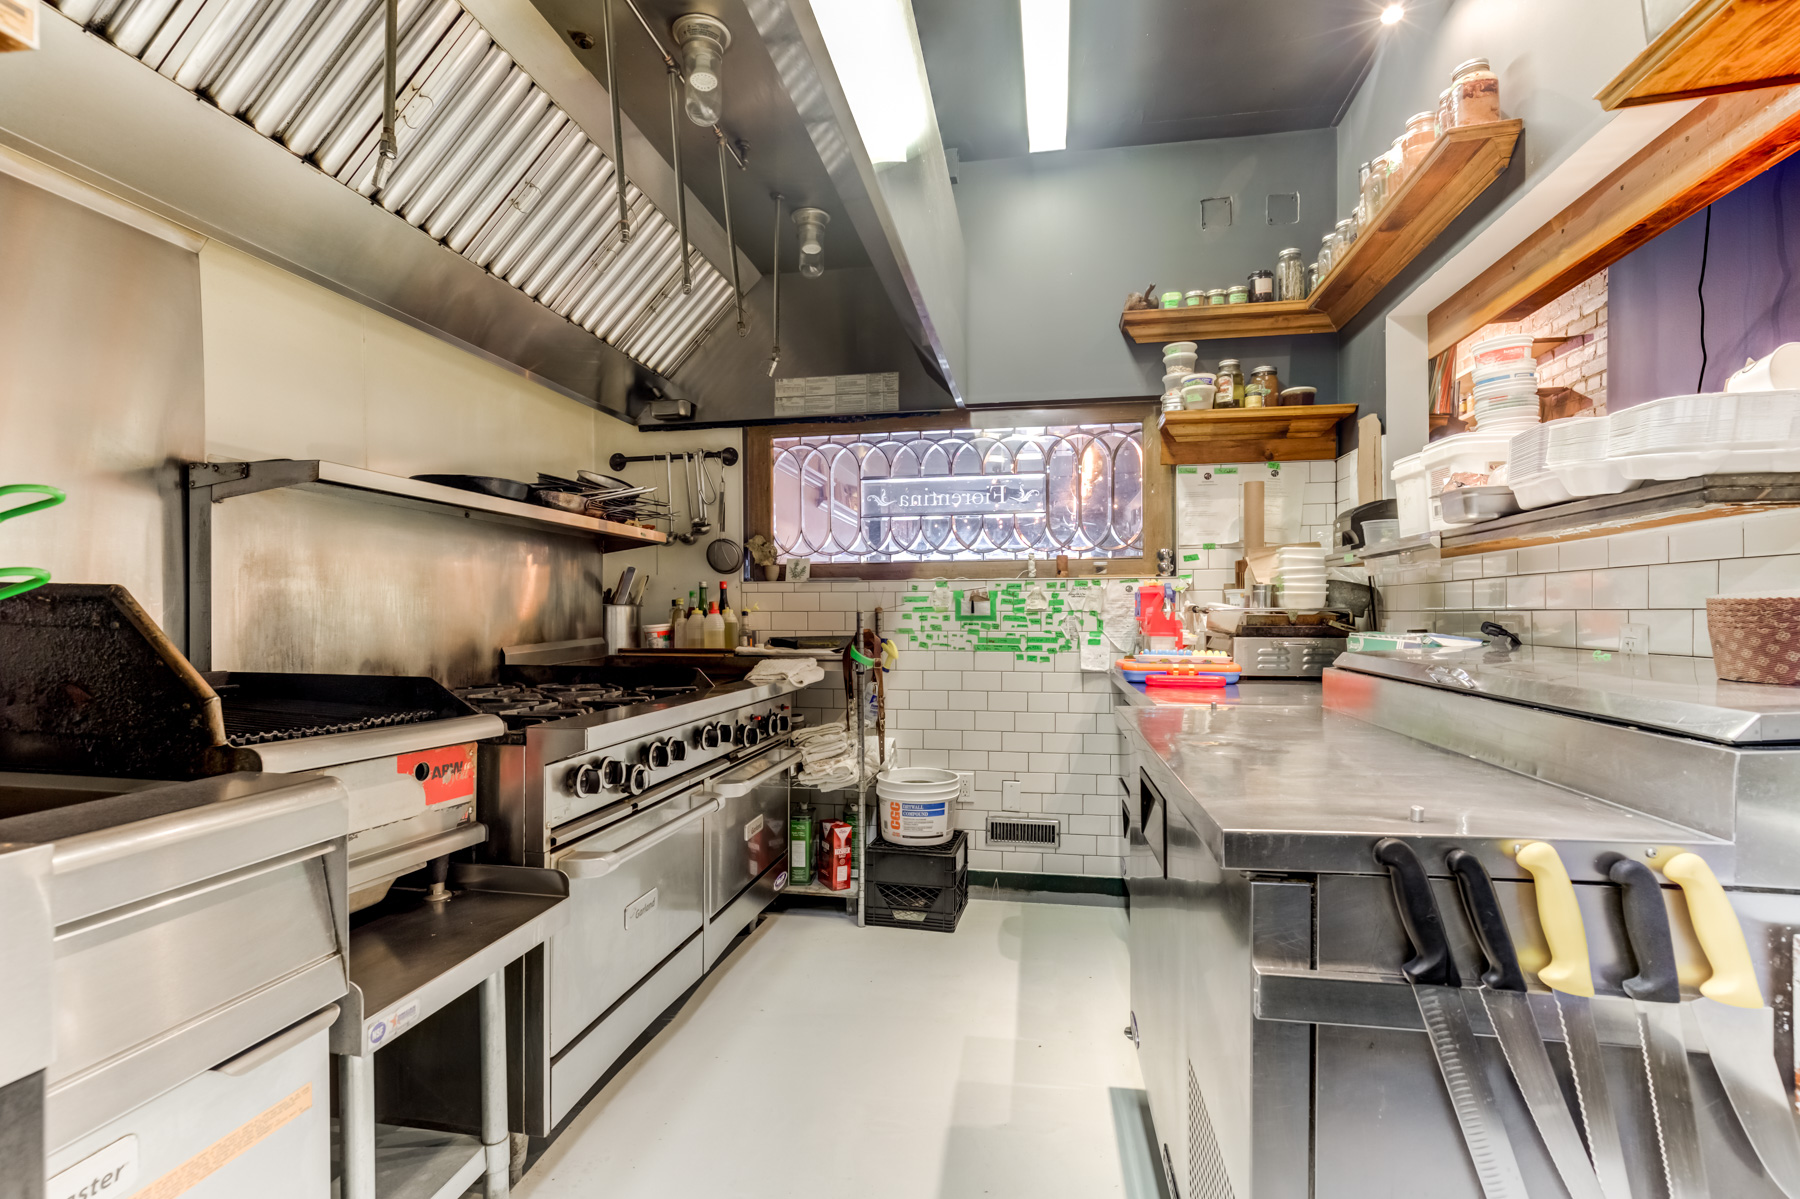 Restaurant kitchen with industrial stove.